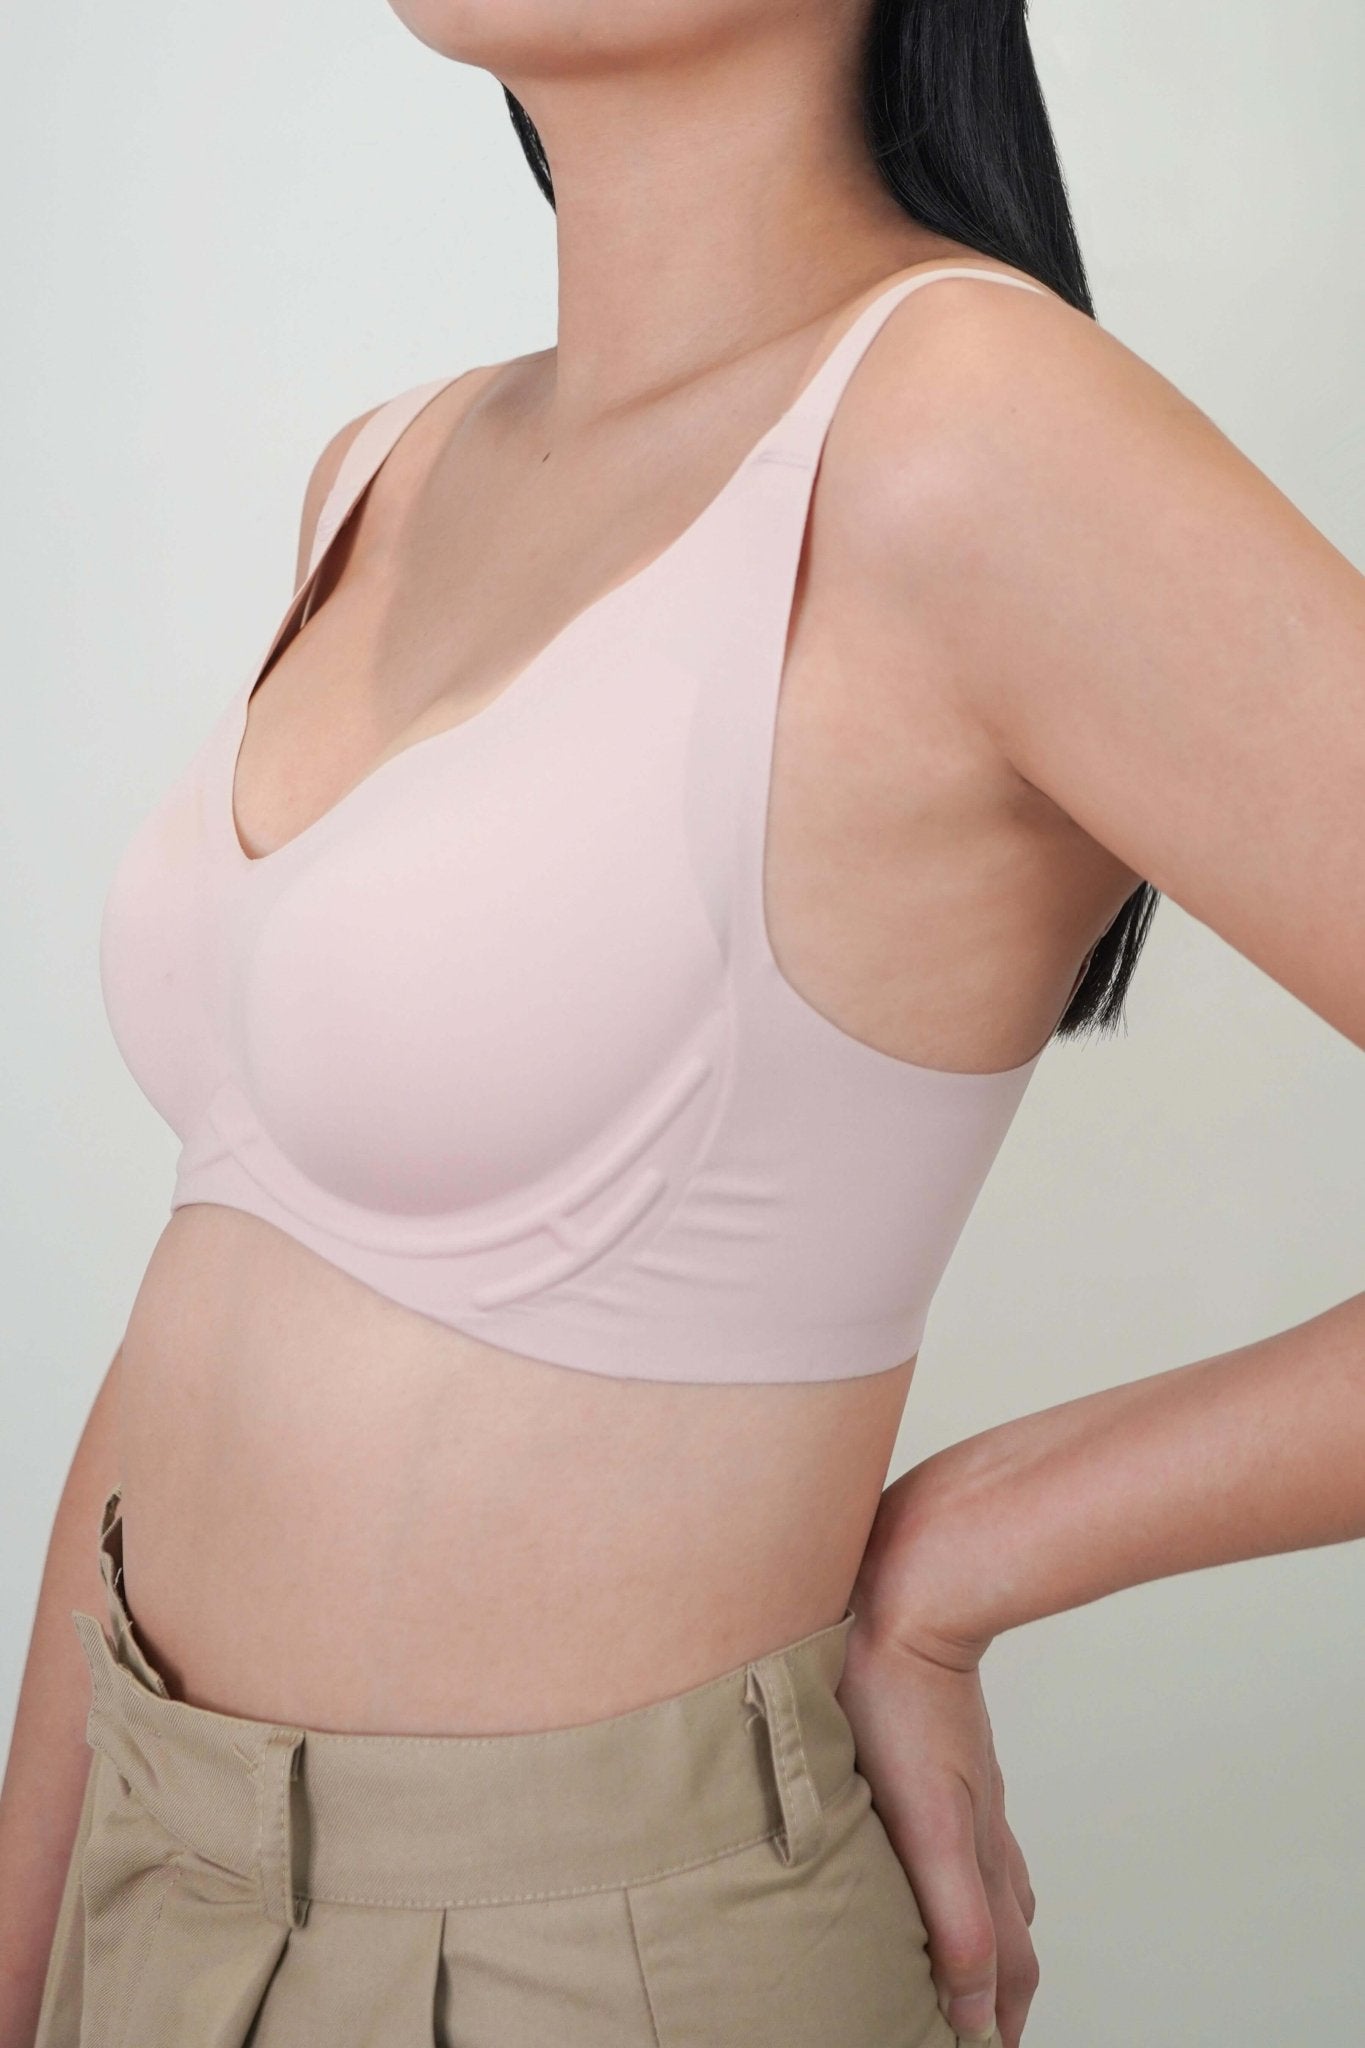 [Star Product] Wavy Support Antigravity Seamless Bra In Color Bundle - Adelais Official